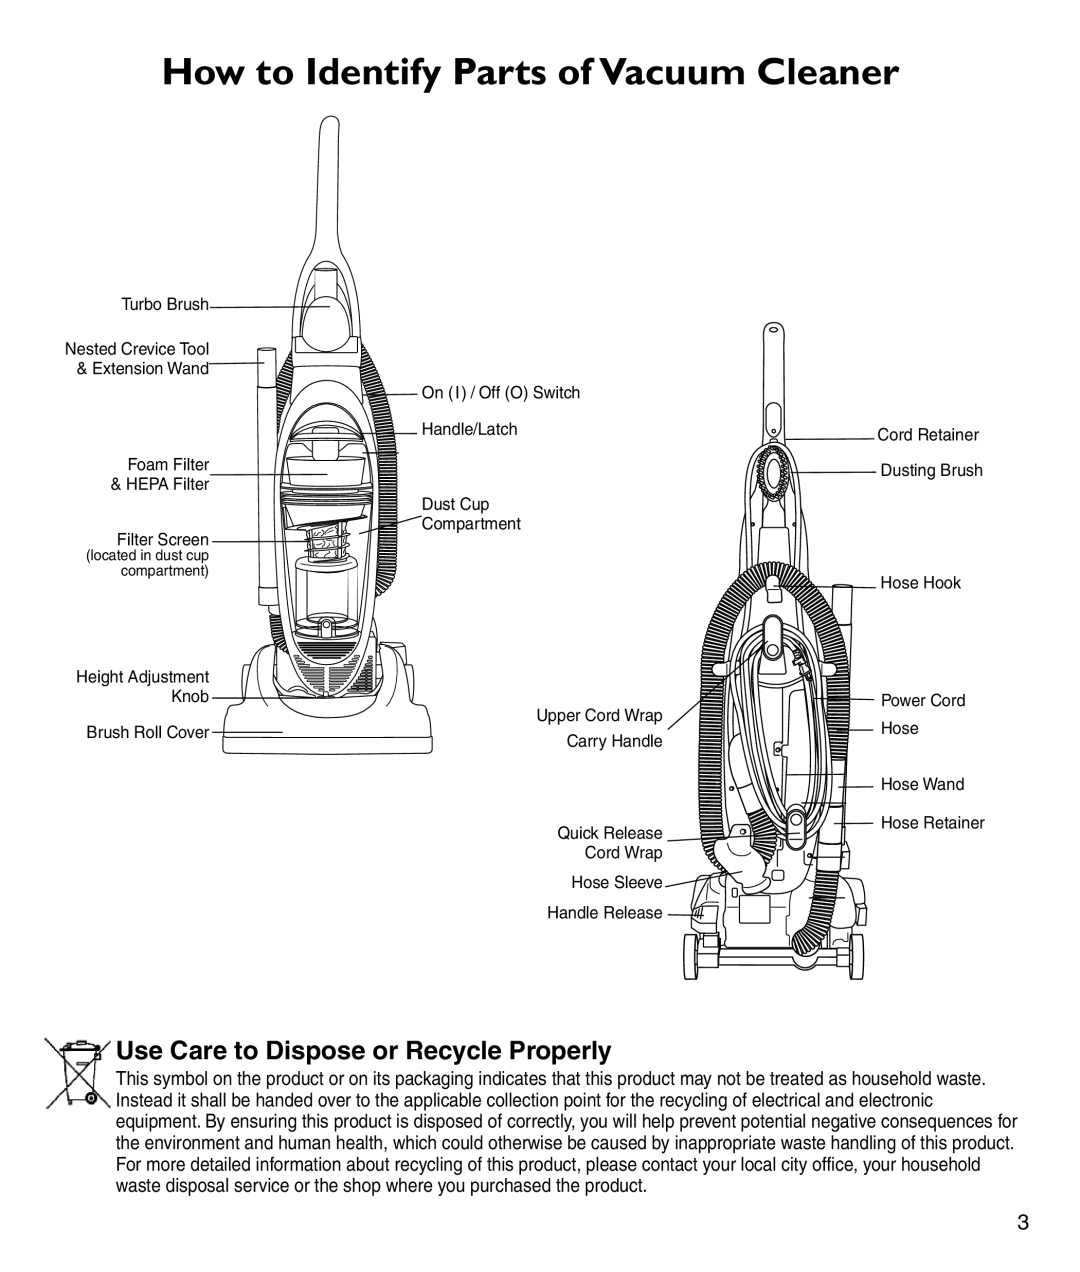 Electrolux Z3040 Series manual How to Identify Parts of Vacuum Cleaner, Use Care to Dispose or Recycle Properly 